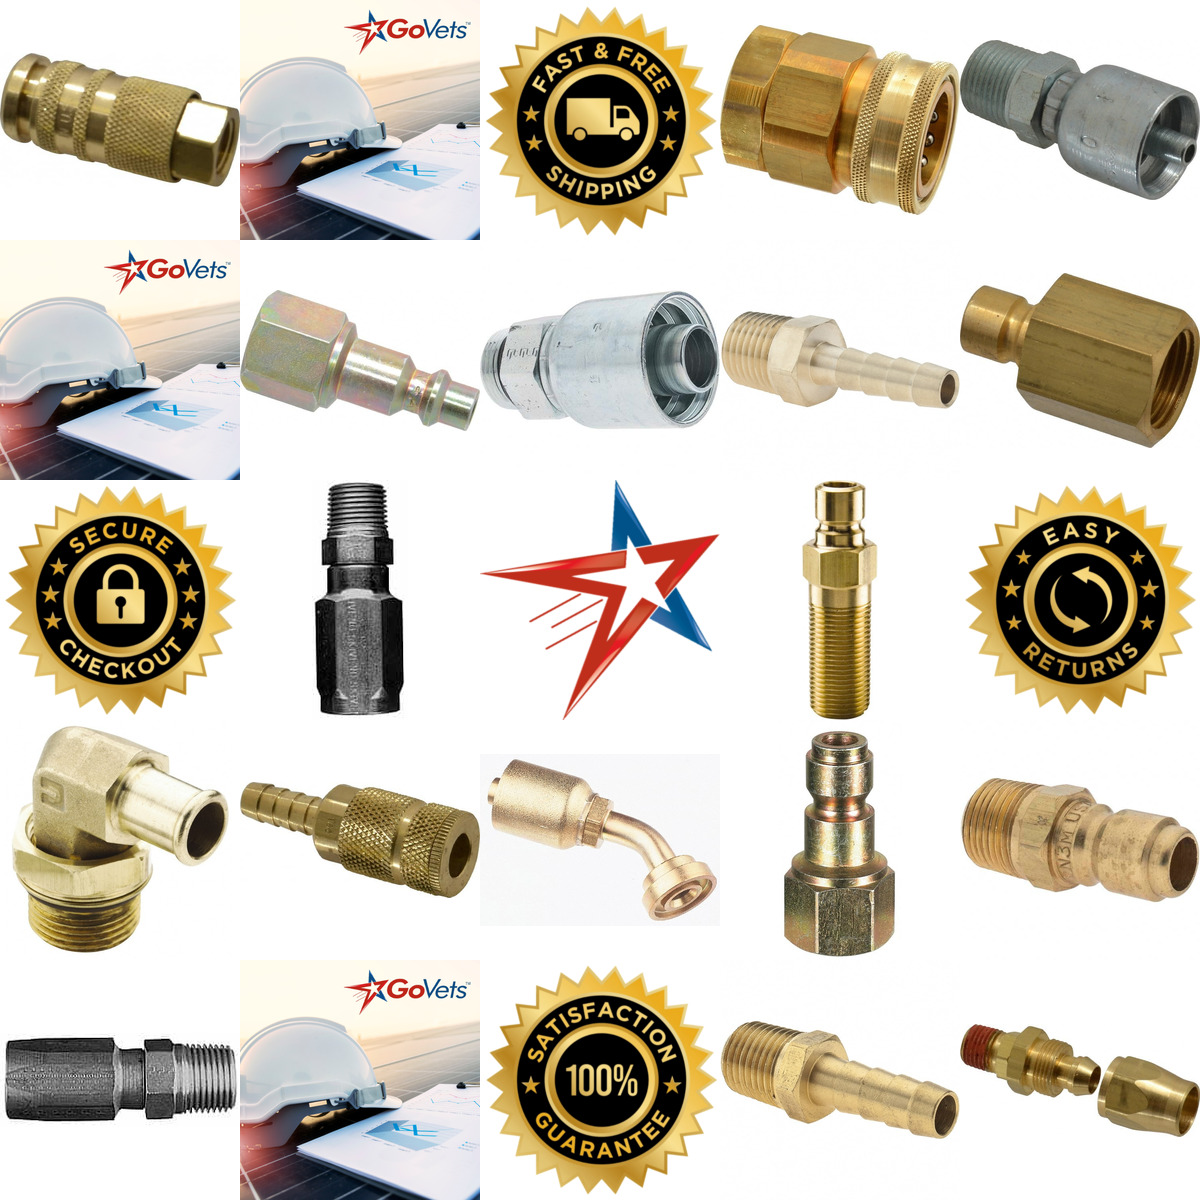 A selection of Hose Fittings products on GoVets